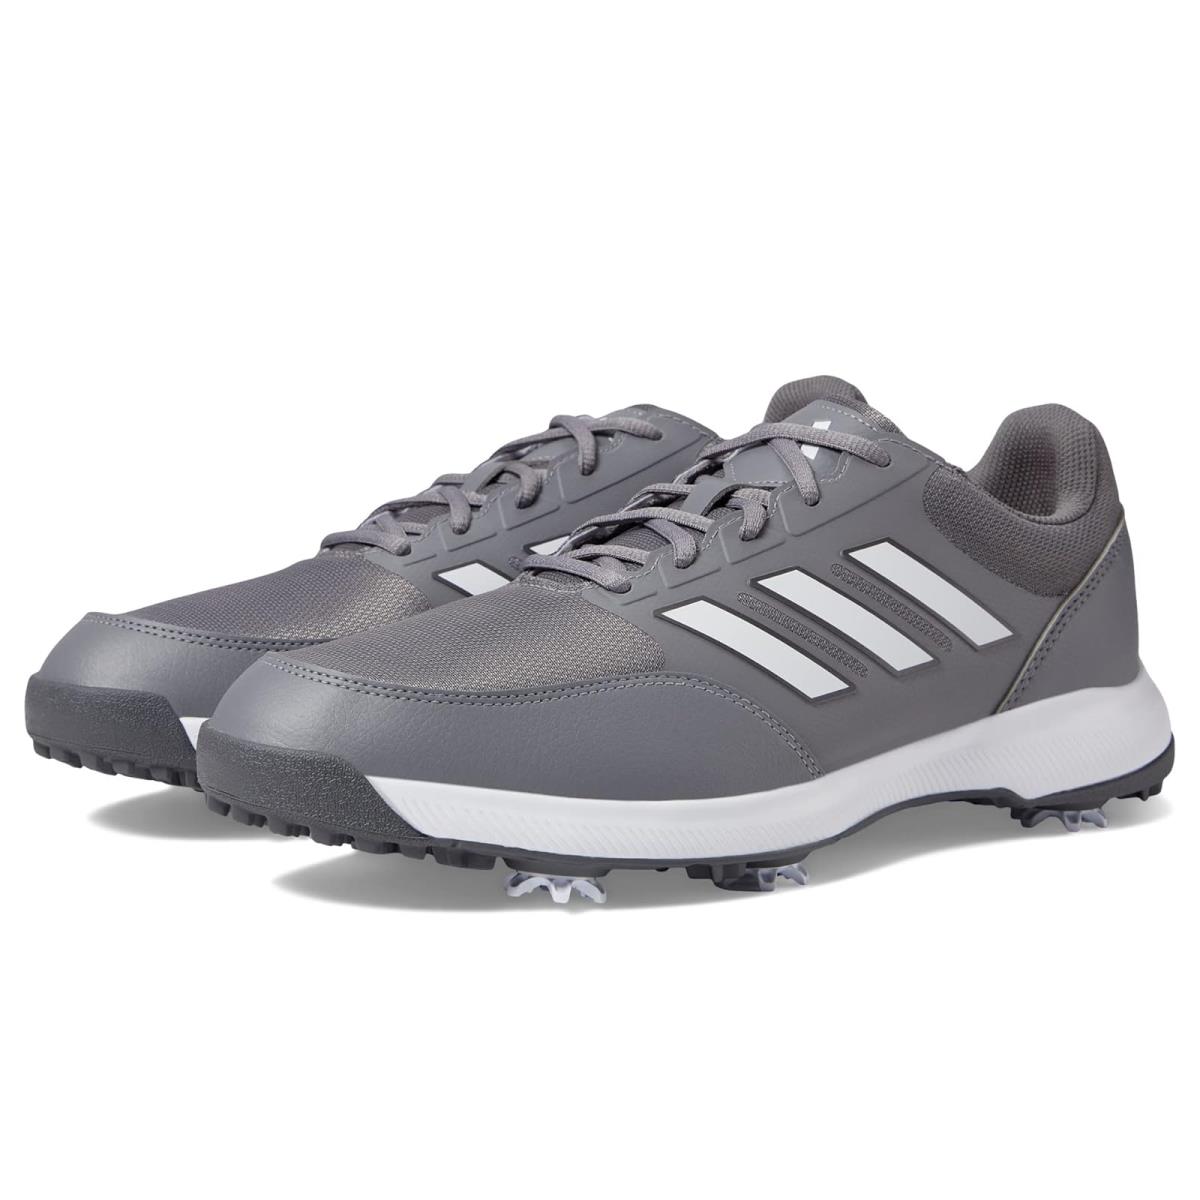 Man`s Sneakers Athletic Shoes Adidas Golf Tech Response 3.0 Golf Shoes Grey Four/Footwear White/Grey Three